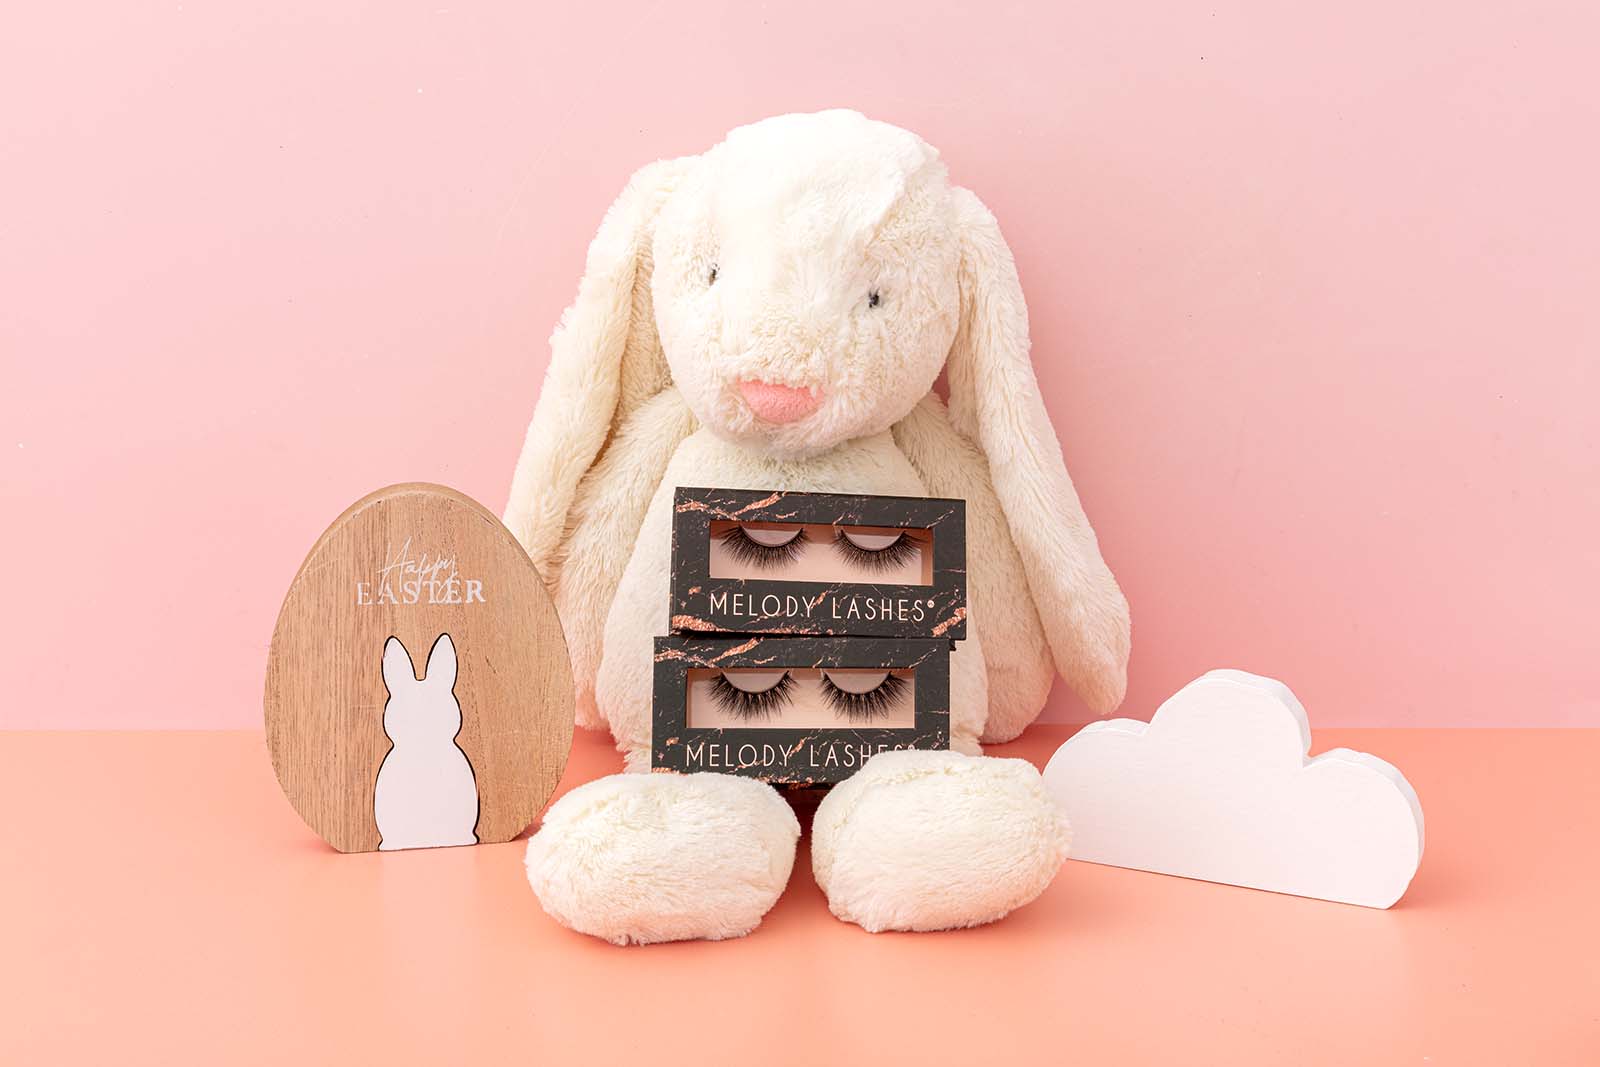 Easter Product Photography for a Lash Brand. Creative Product Stills by Megs at Colourpop Studio